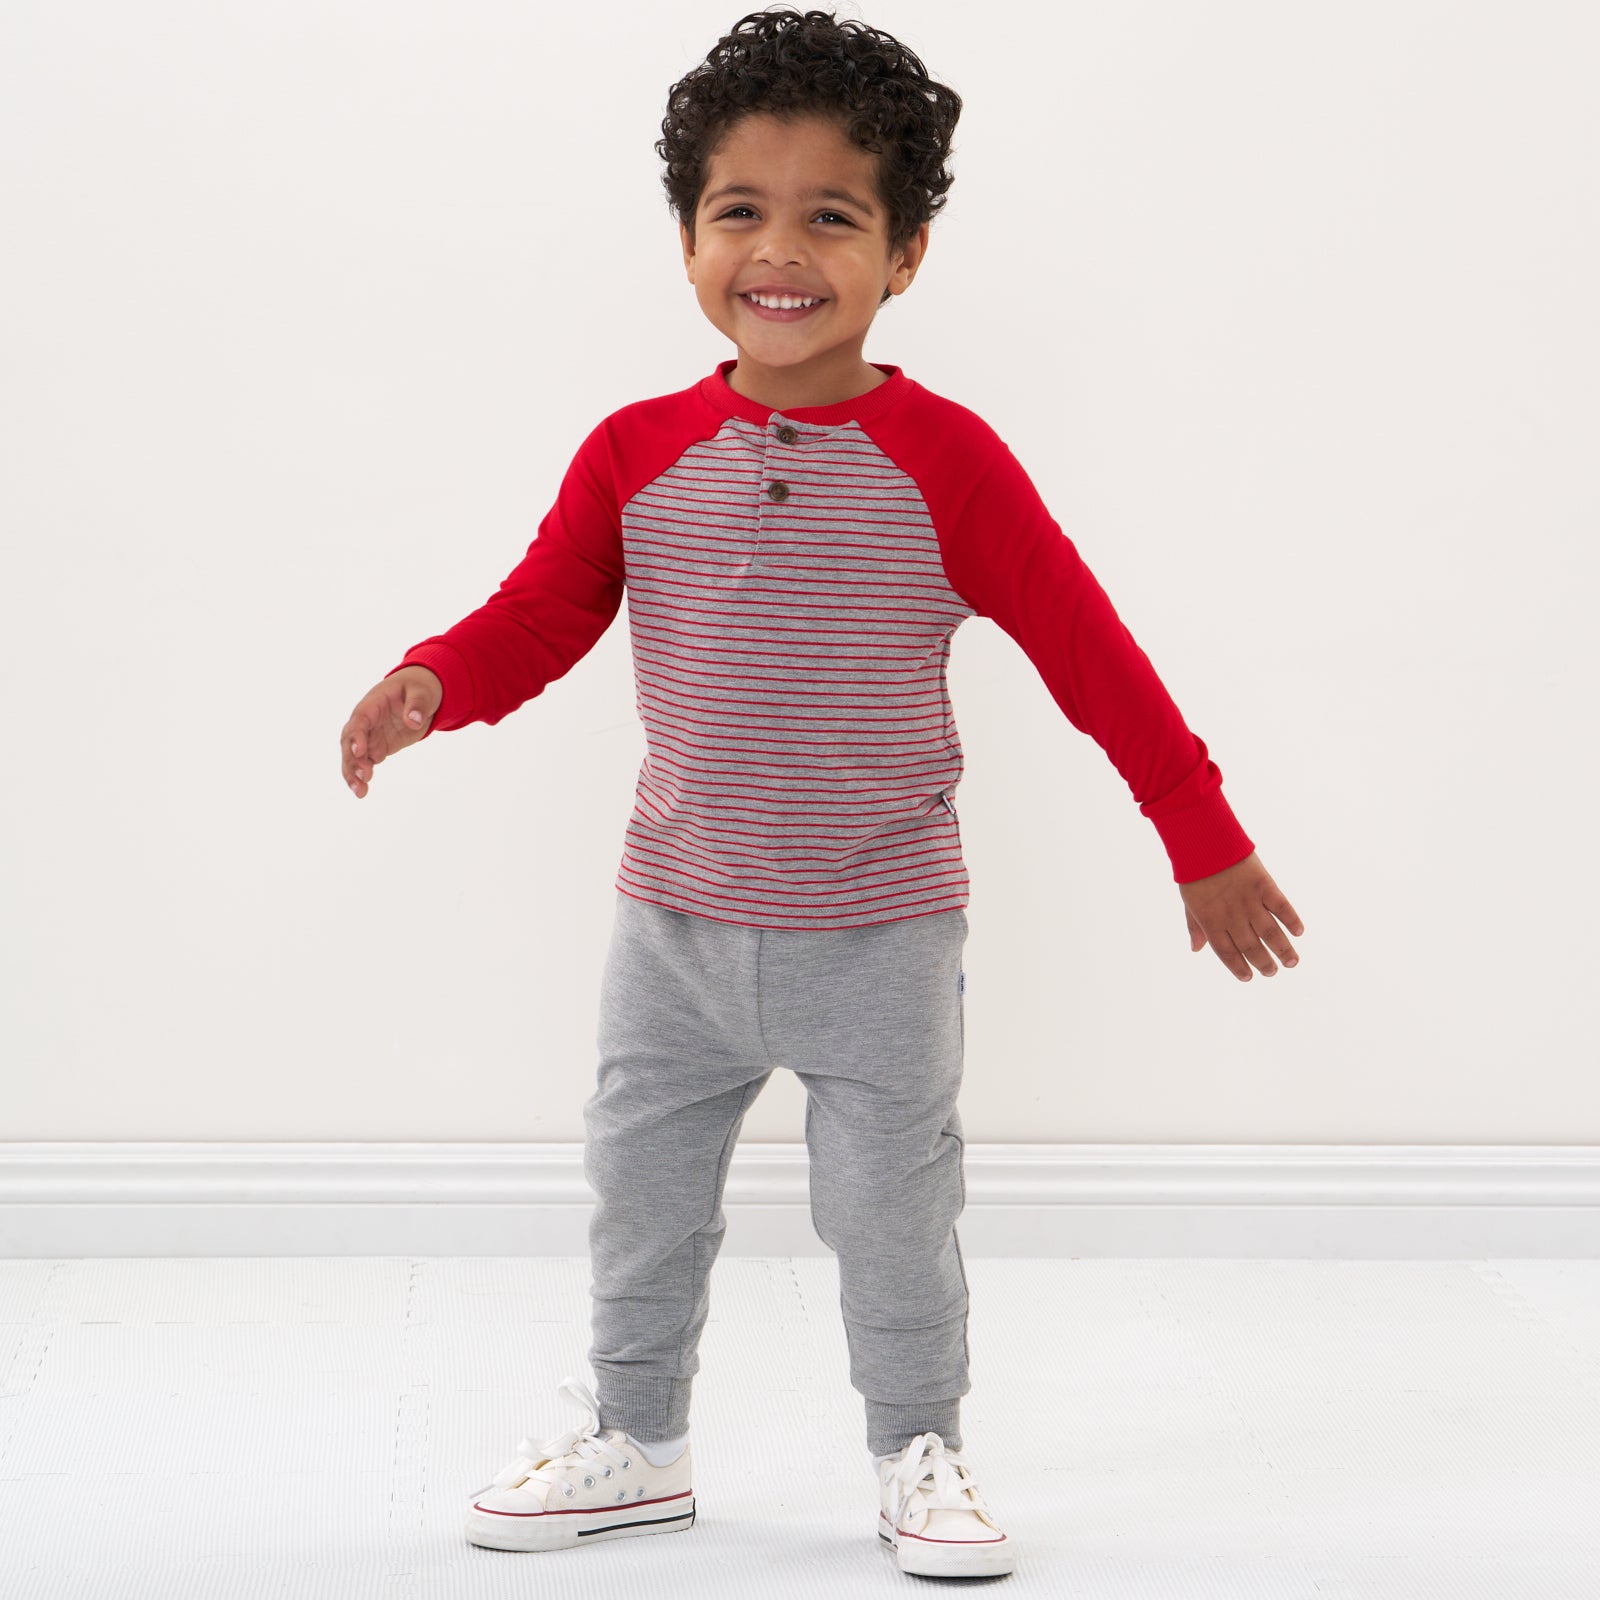 Alternate image of a child wearing a Heather Gray Stripes raglan henley tee and coordinating joggers